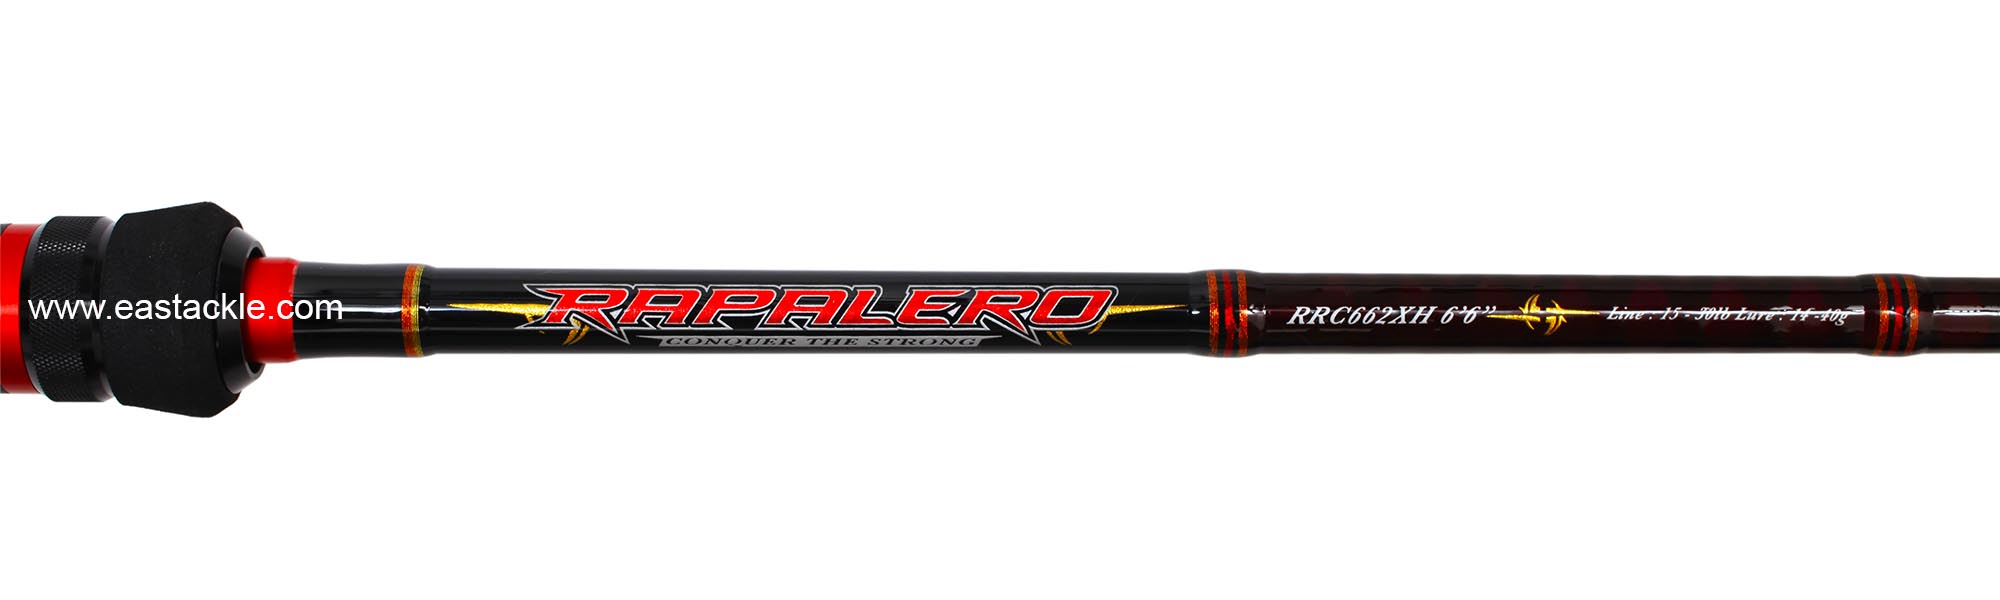 Rapala - 2018 Rapalero - RRC662XH - Bait Casting Rod - Logo and Blank Specifications (Top View) | Eastackle